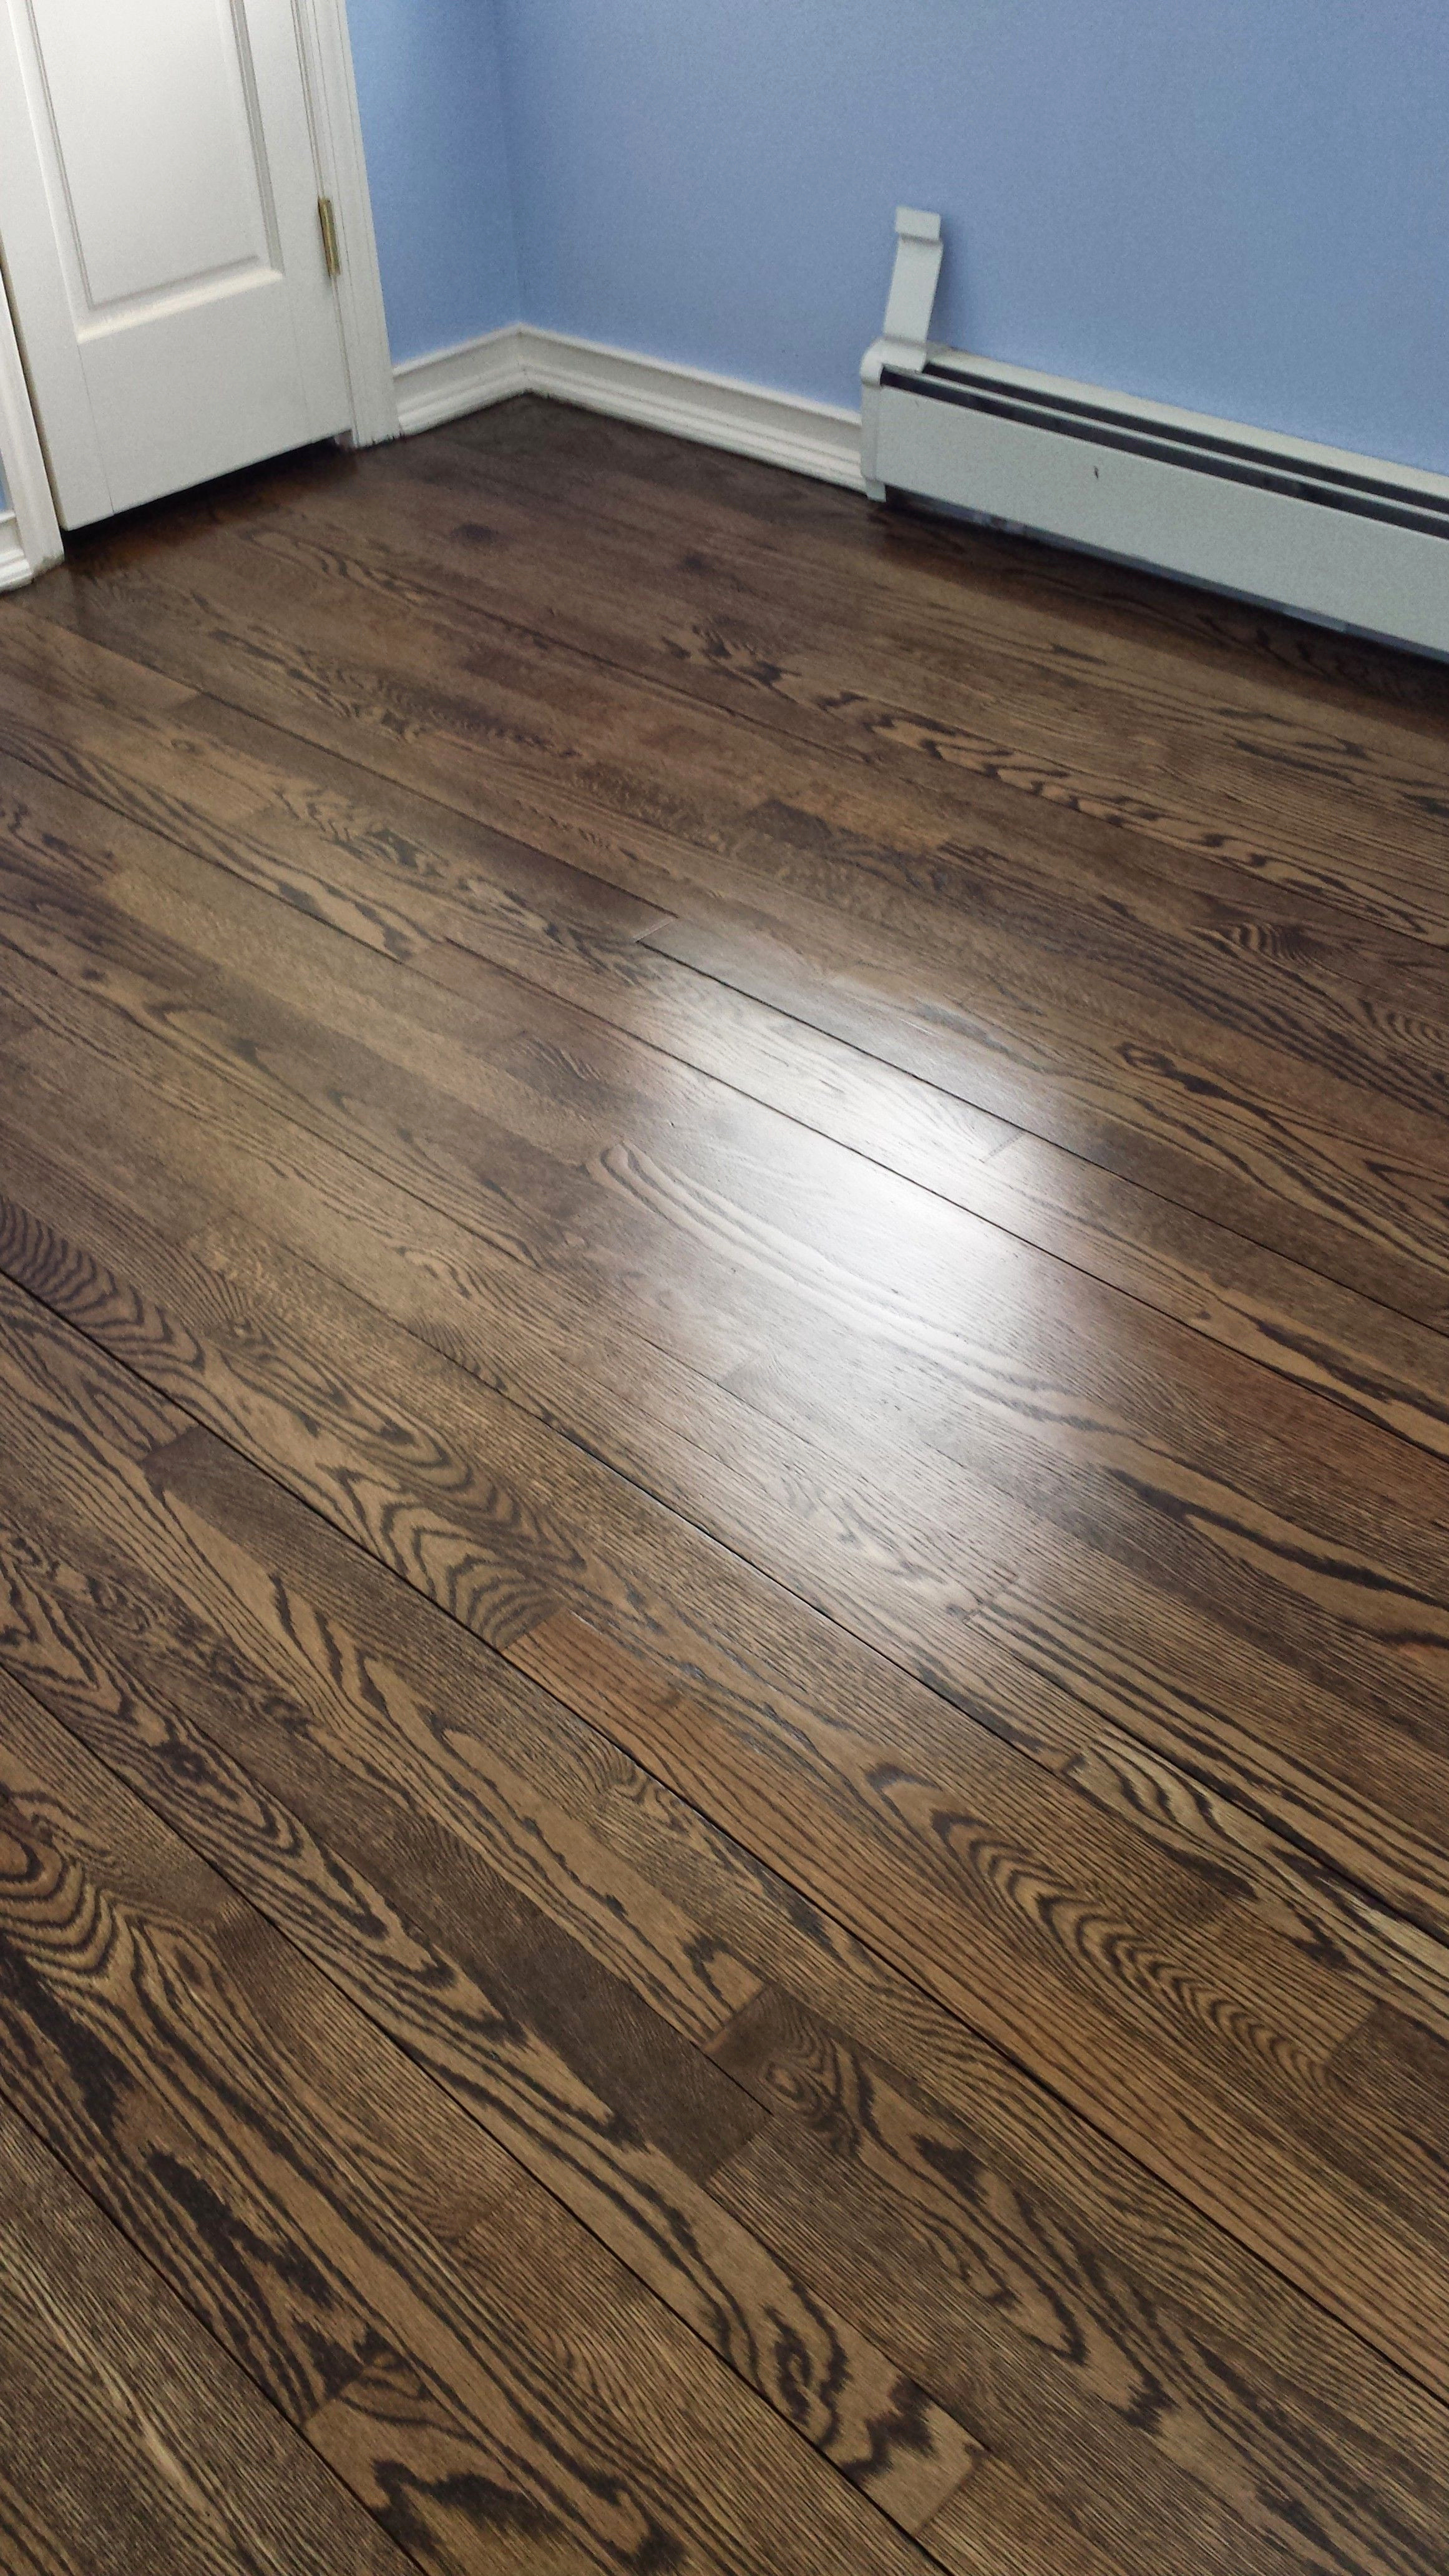 14 Great Cost to Refinish Prefinished Hardwood Floors 2024 free download cost to refinish prefinished hardwood floors of wood floor refinishing near me new how to silence a squeaking floor within wood floor refinishing near me photo of hardwood floor repair 50 in